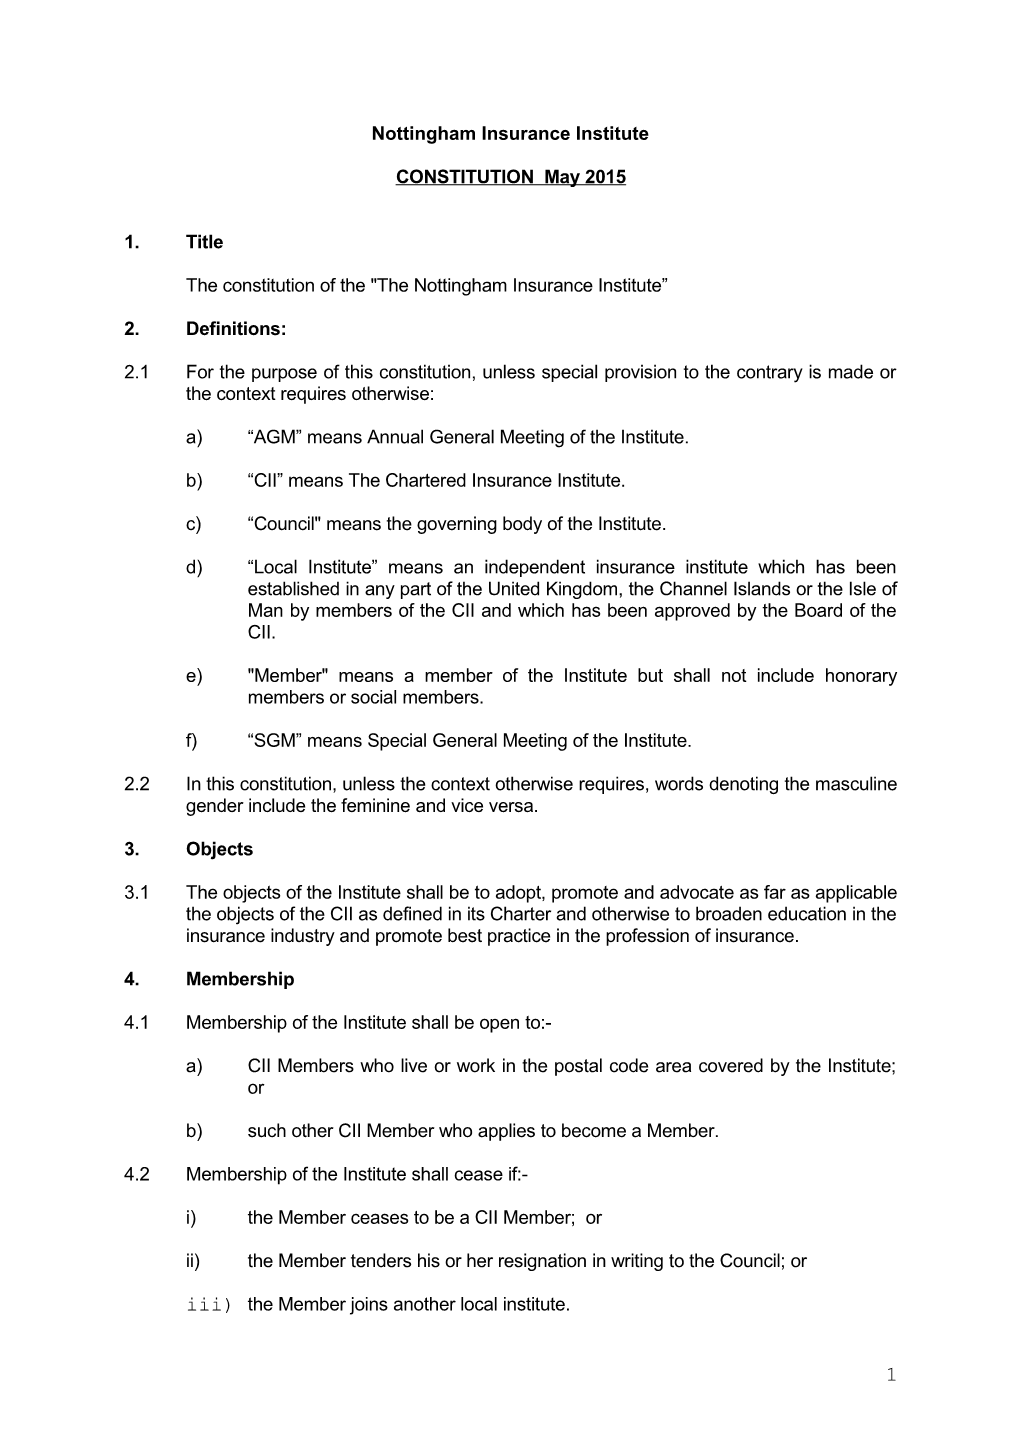 The Constitution of the the Nottingham Insurance Institute